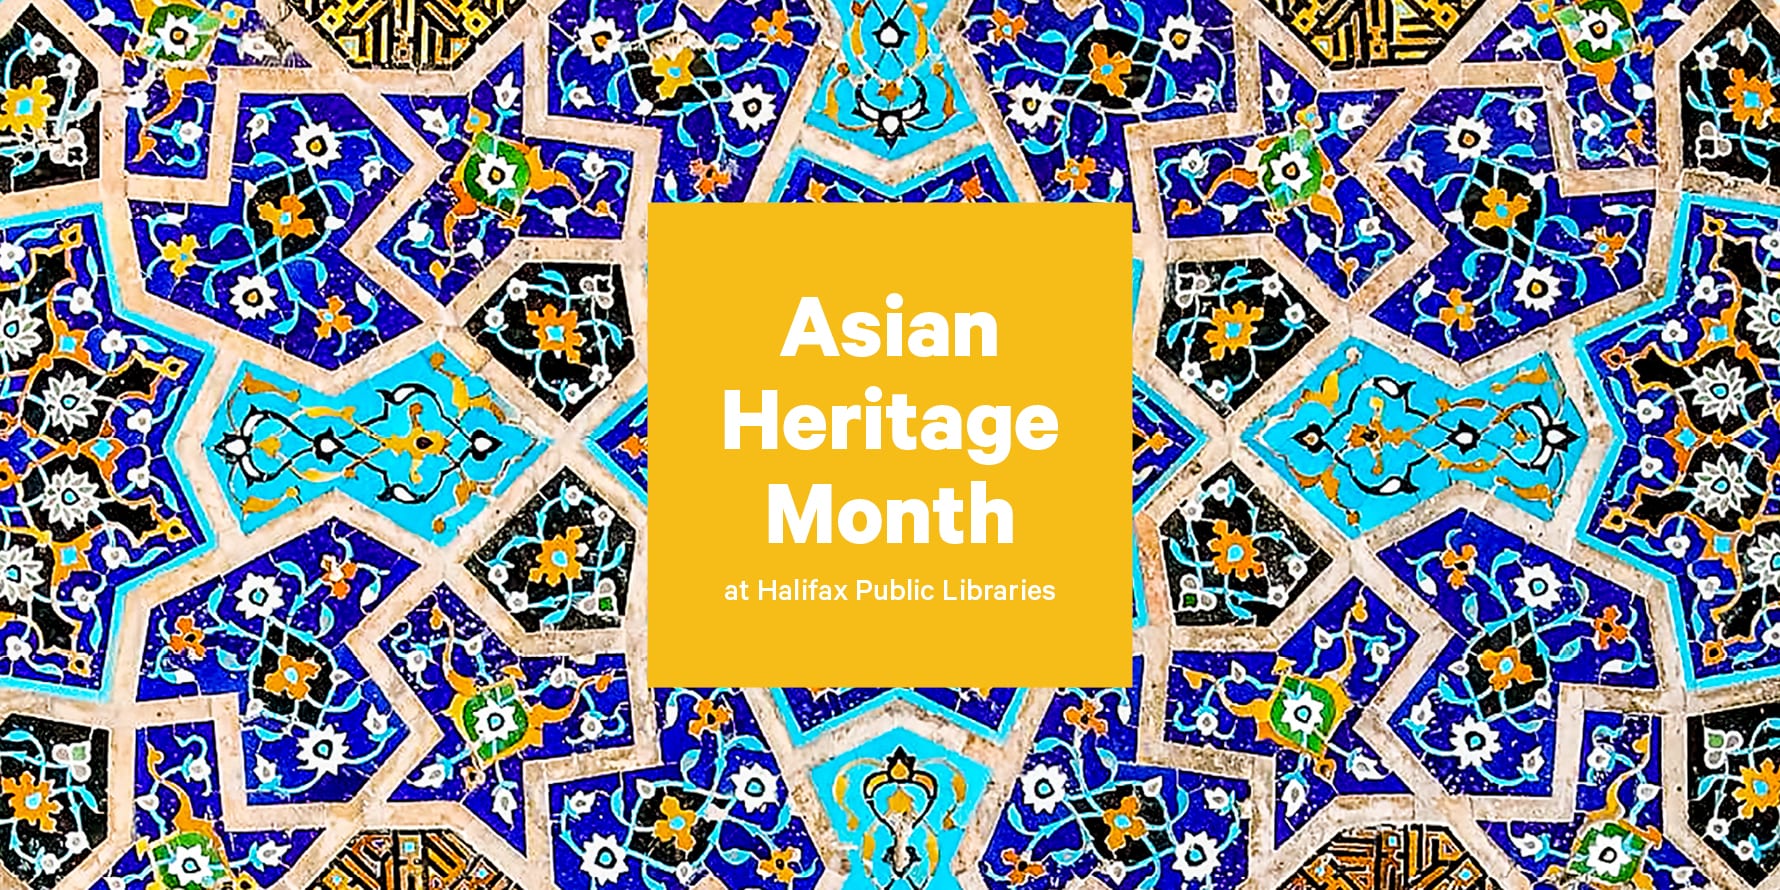 Asian Heritage Month at Hallifax Public Libraries text is overlaid on an intricate tiled background